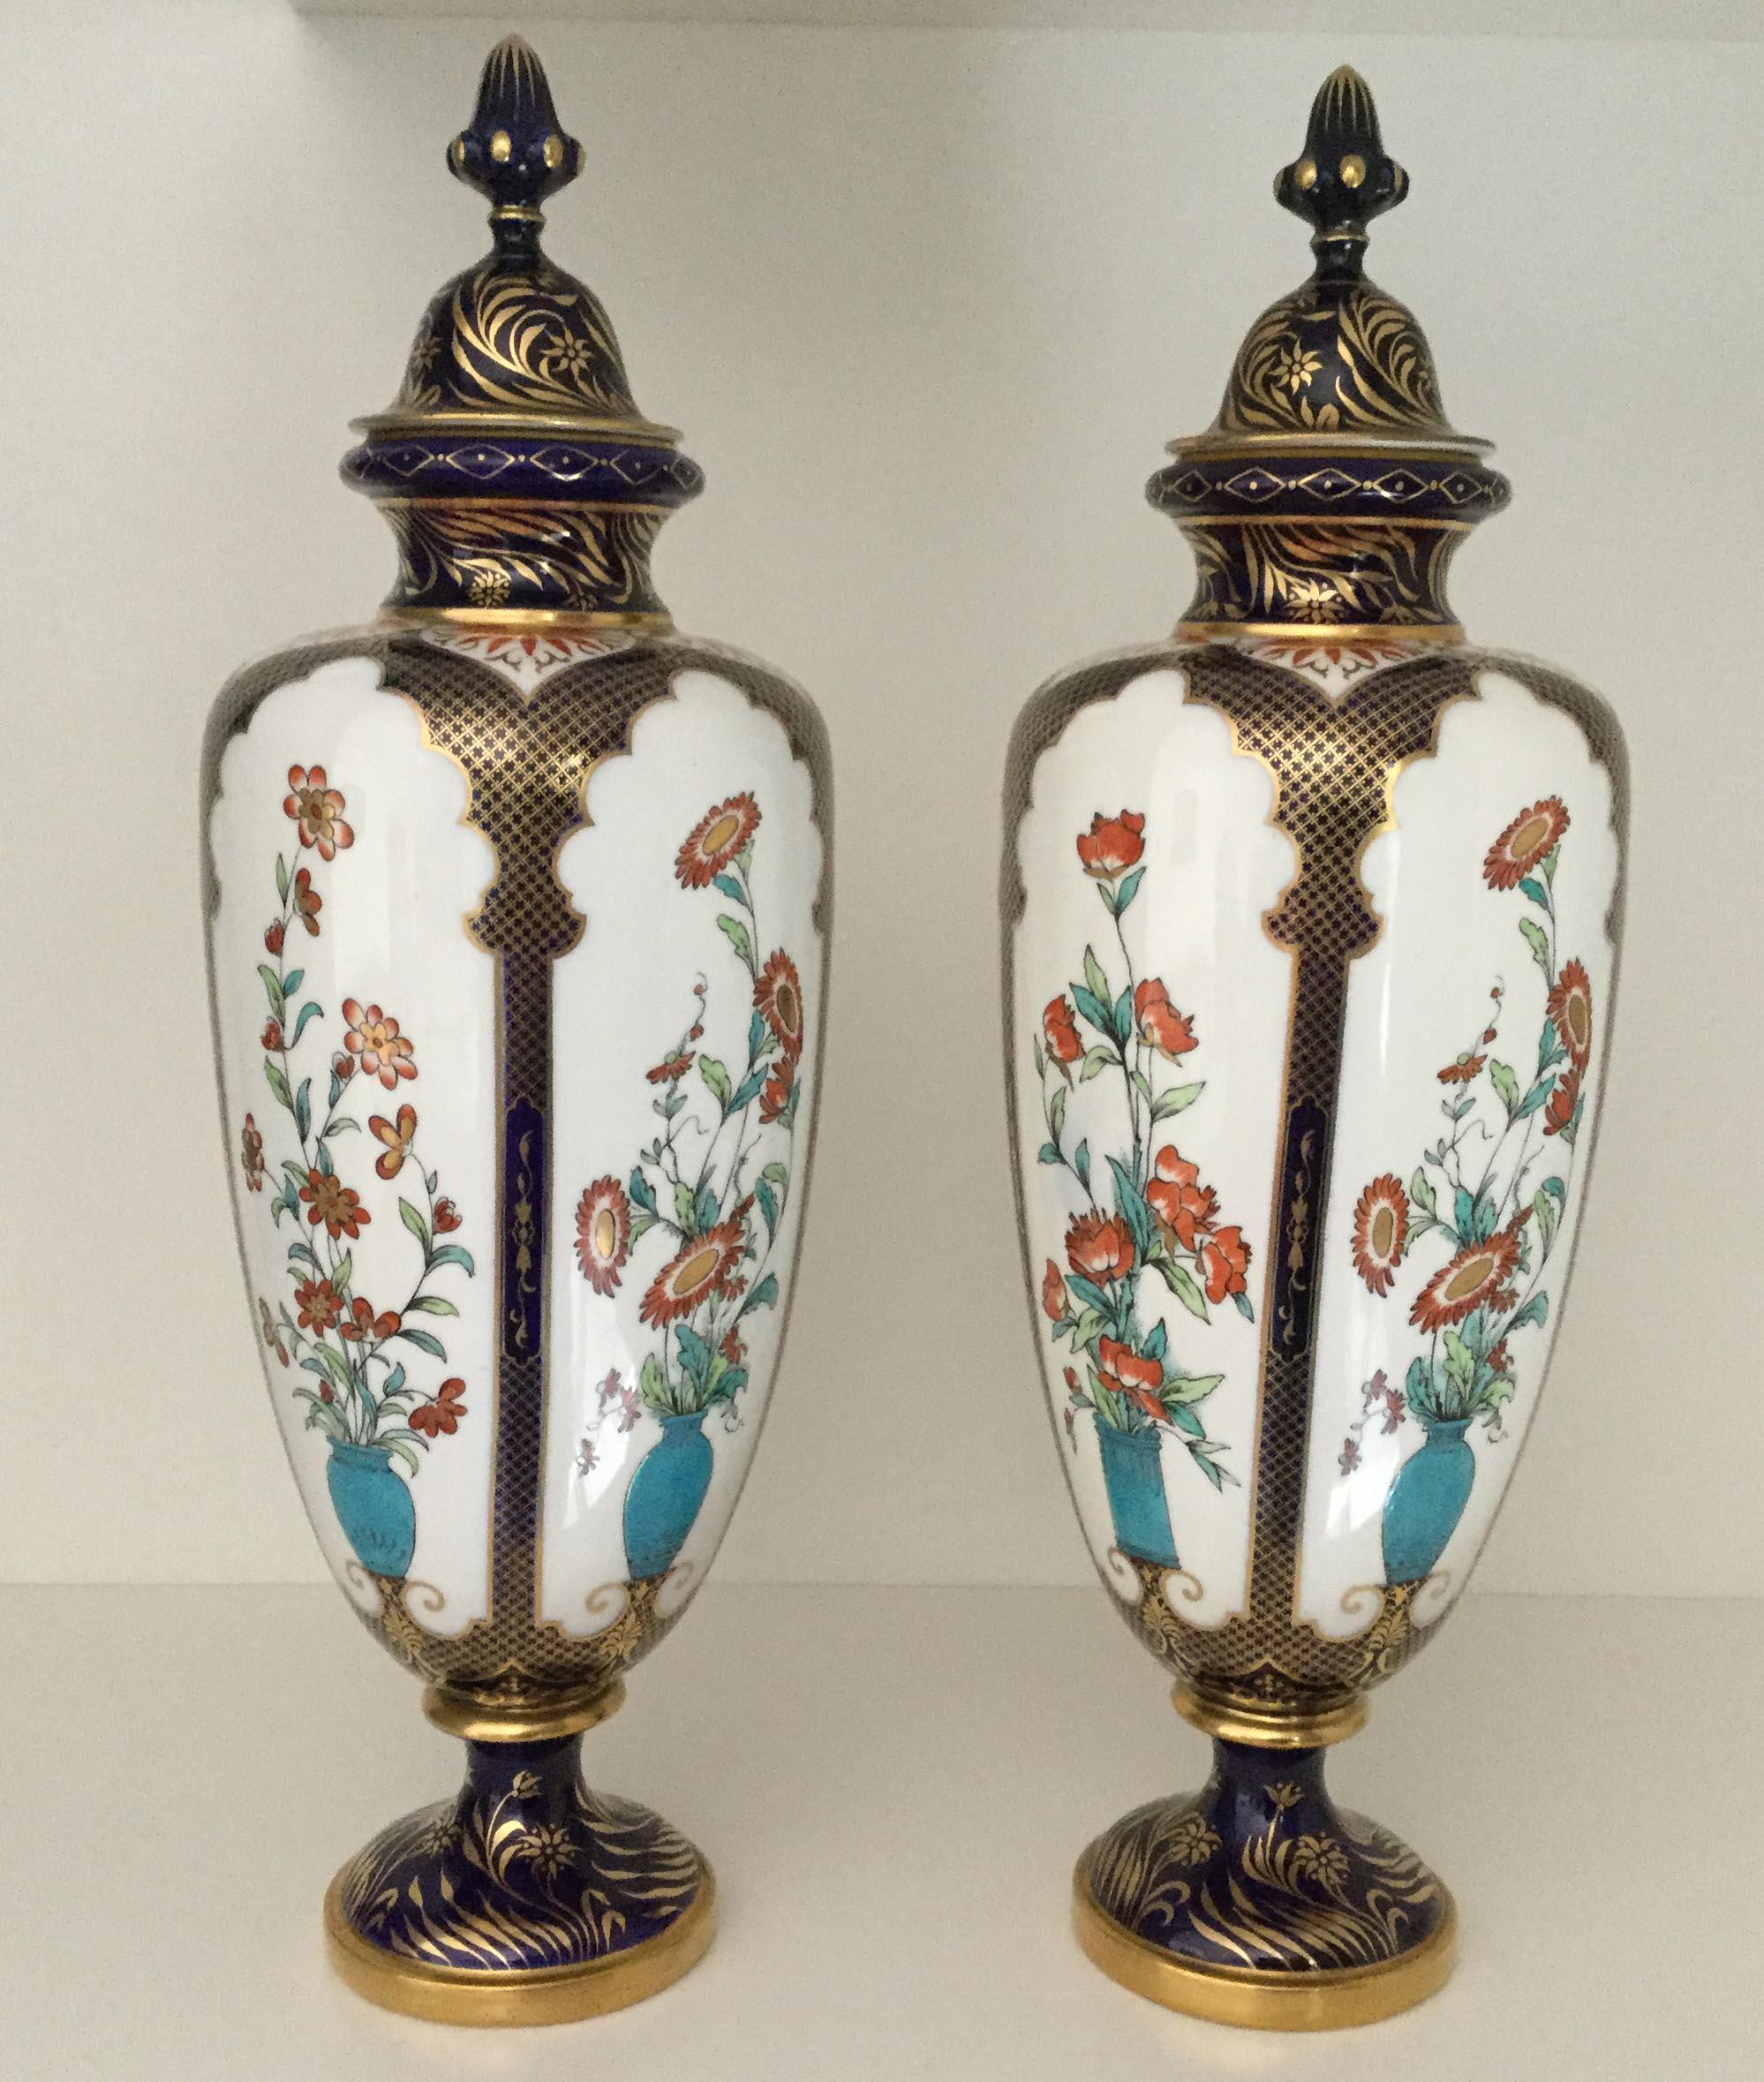 A rare pair of decorative 19th century Royal Worcester porcelain vases decorated in the Japonesque taste, dated 1896-1897.

Each vase is decorated with five white panels containing colorful red floral displays in turquoise urns, the panels are